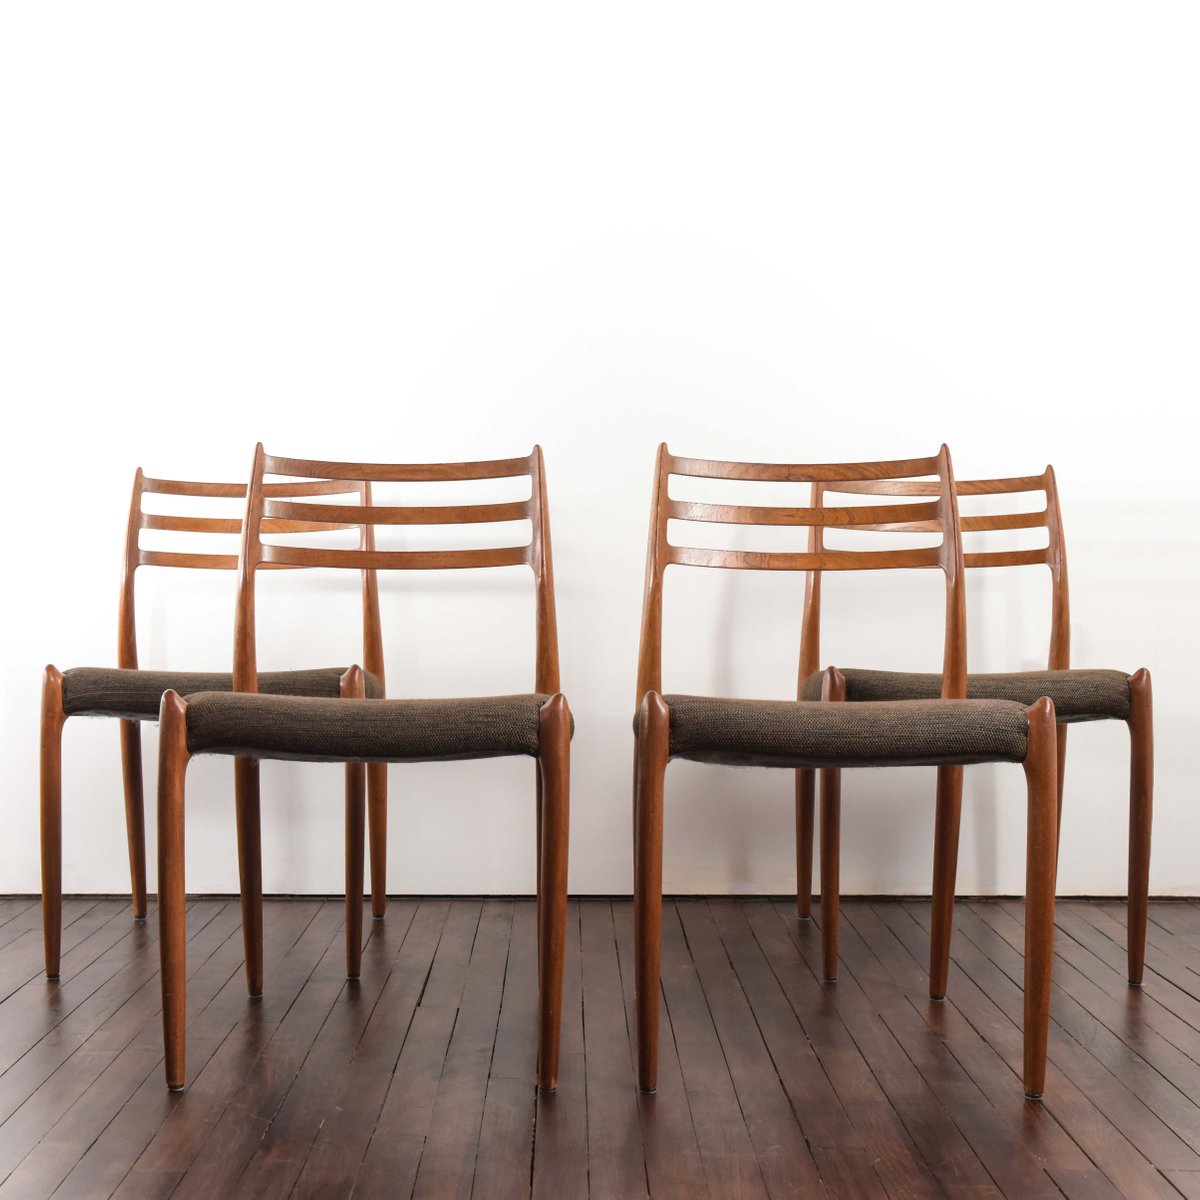 model 78 teak dining chairs by niels otto moller for j l mollers 1960s set of 4 OA-819790